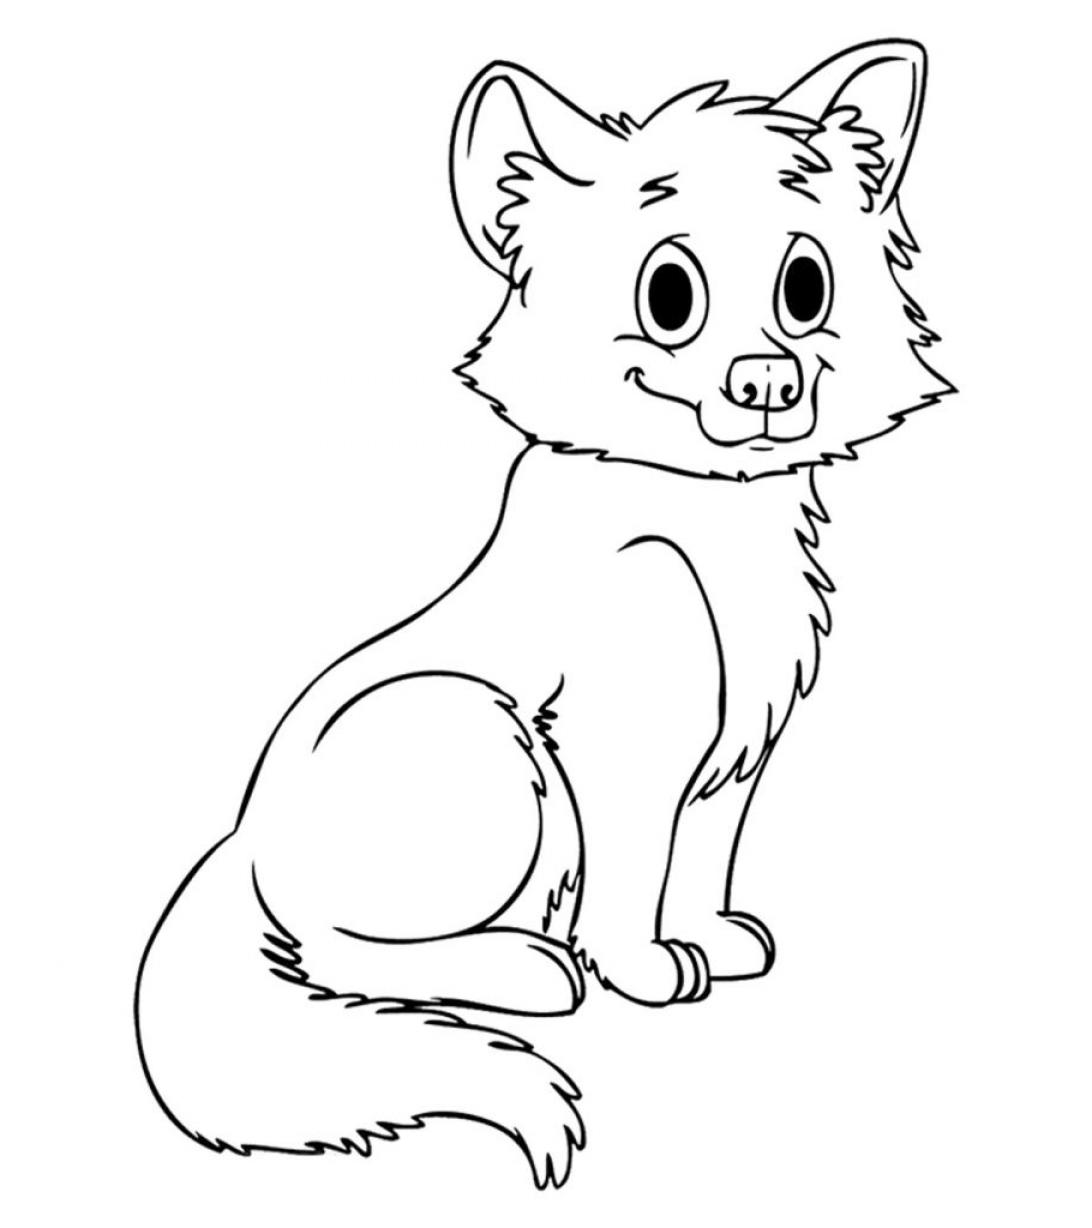 Printable Wolf Coloring Pages Online - SheetalColor.com